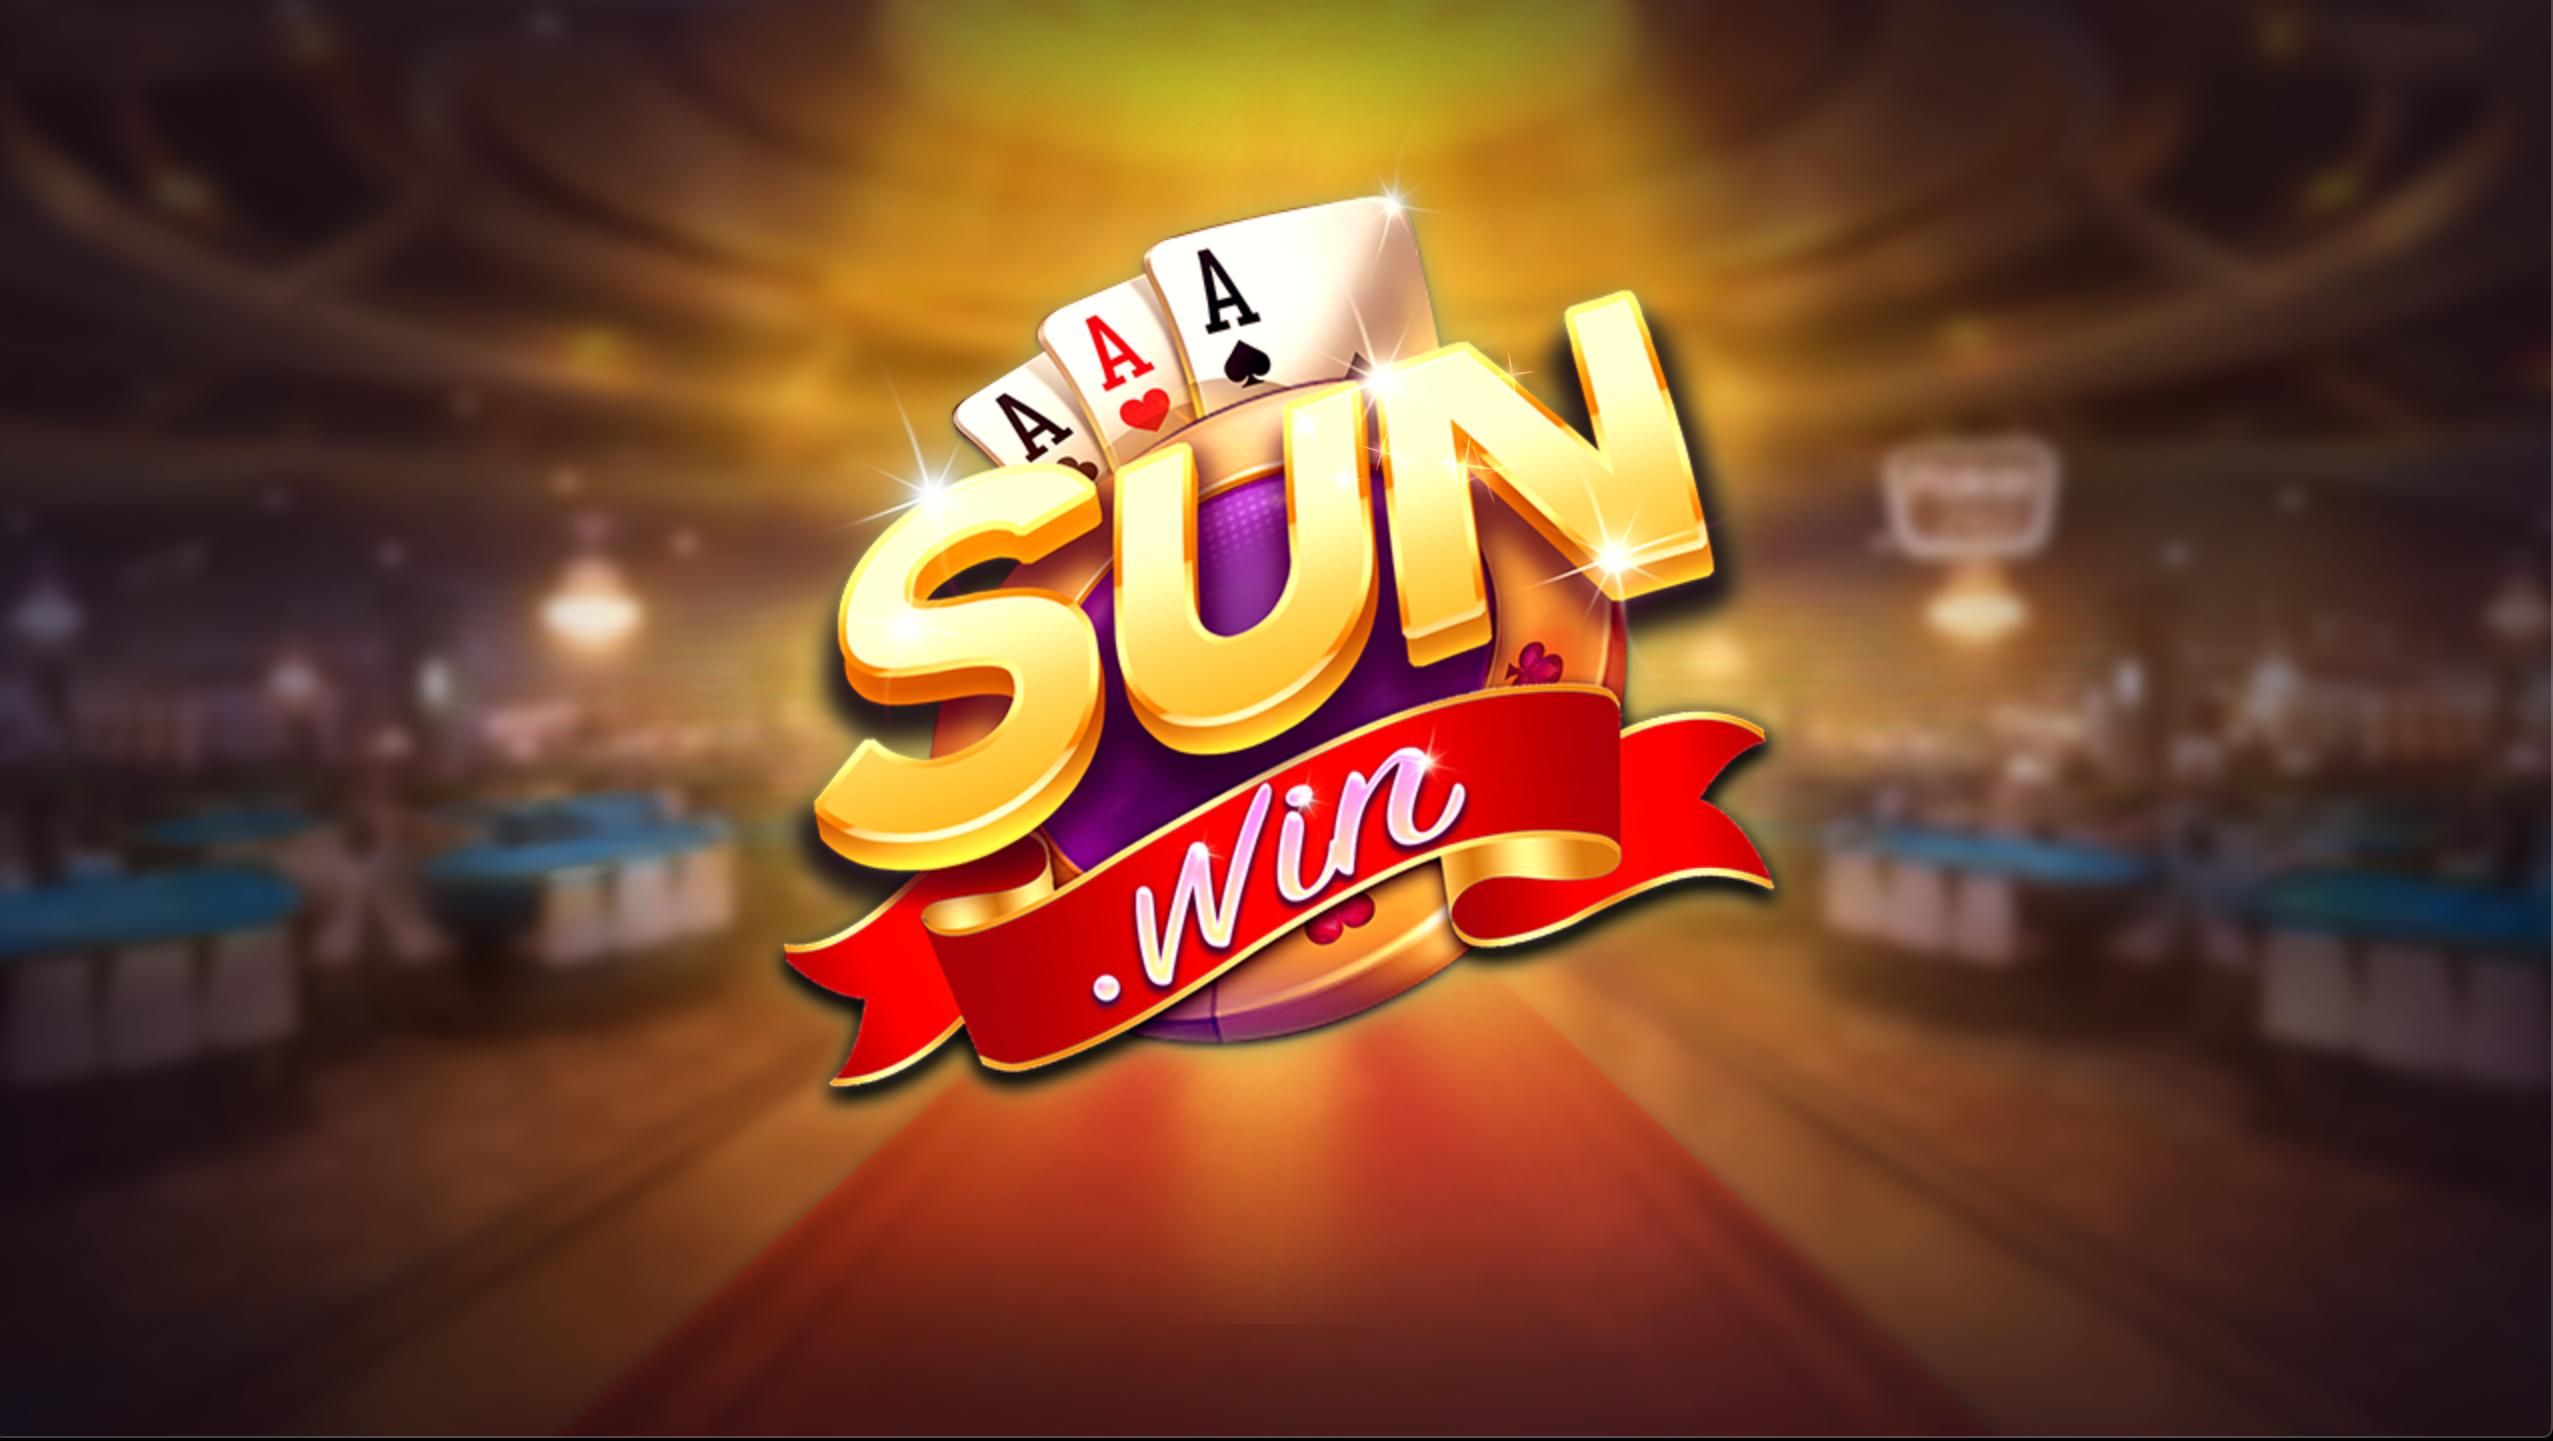 SunWin - TLMN for Android - APK Download